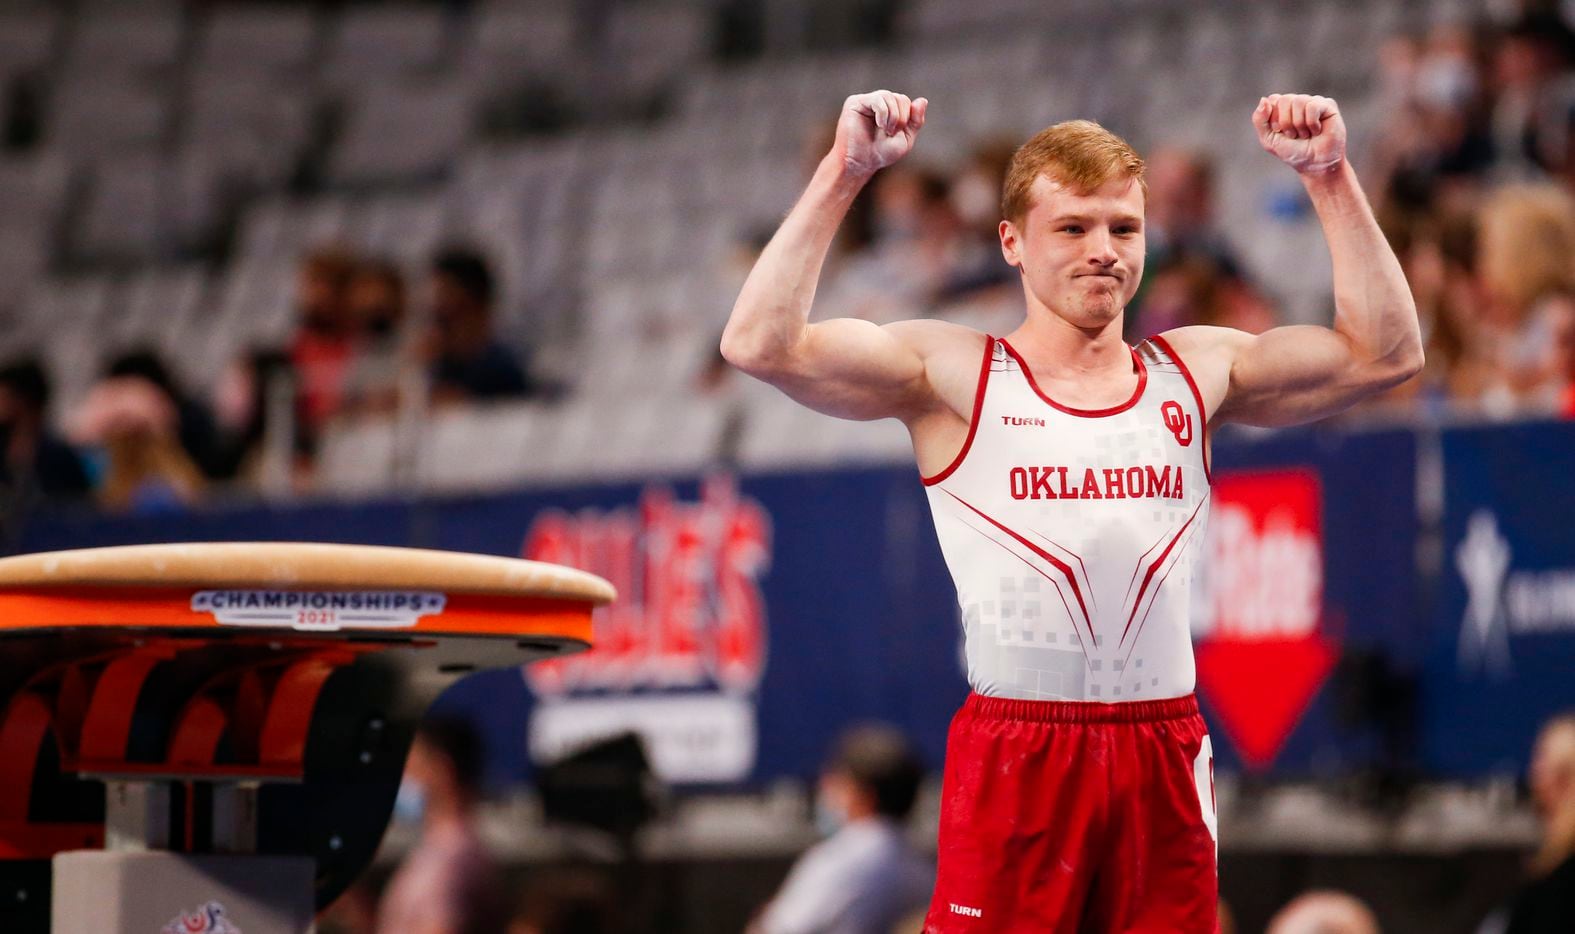 University of Oklahoma's Matt Wenske celebrates after completing the vault during Day 1 of...